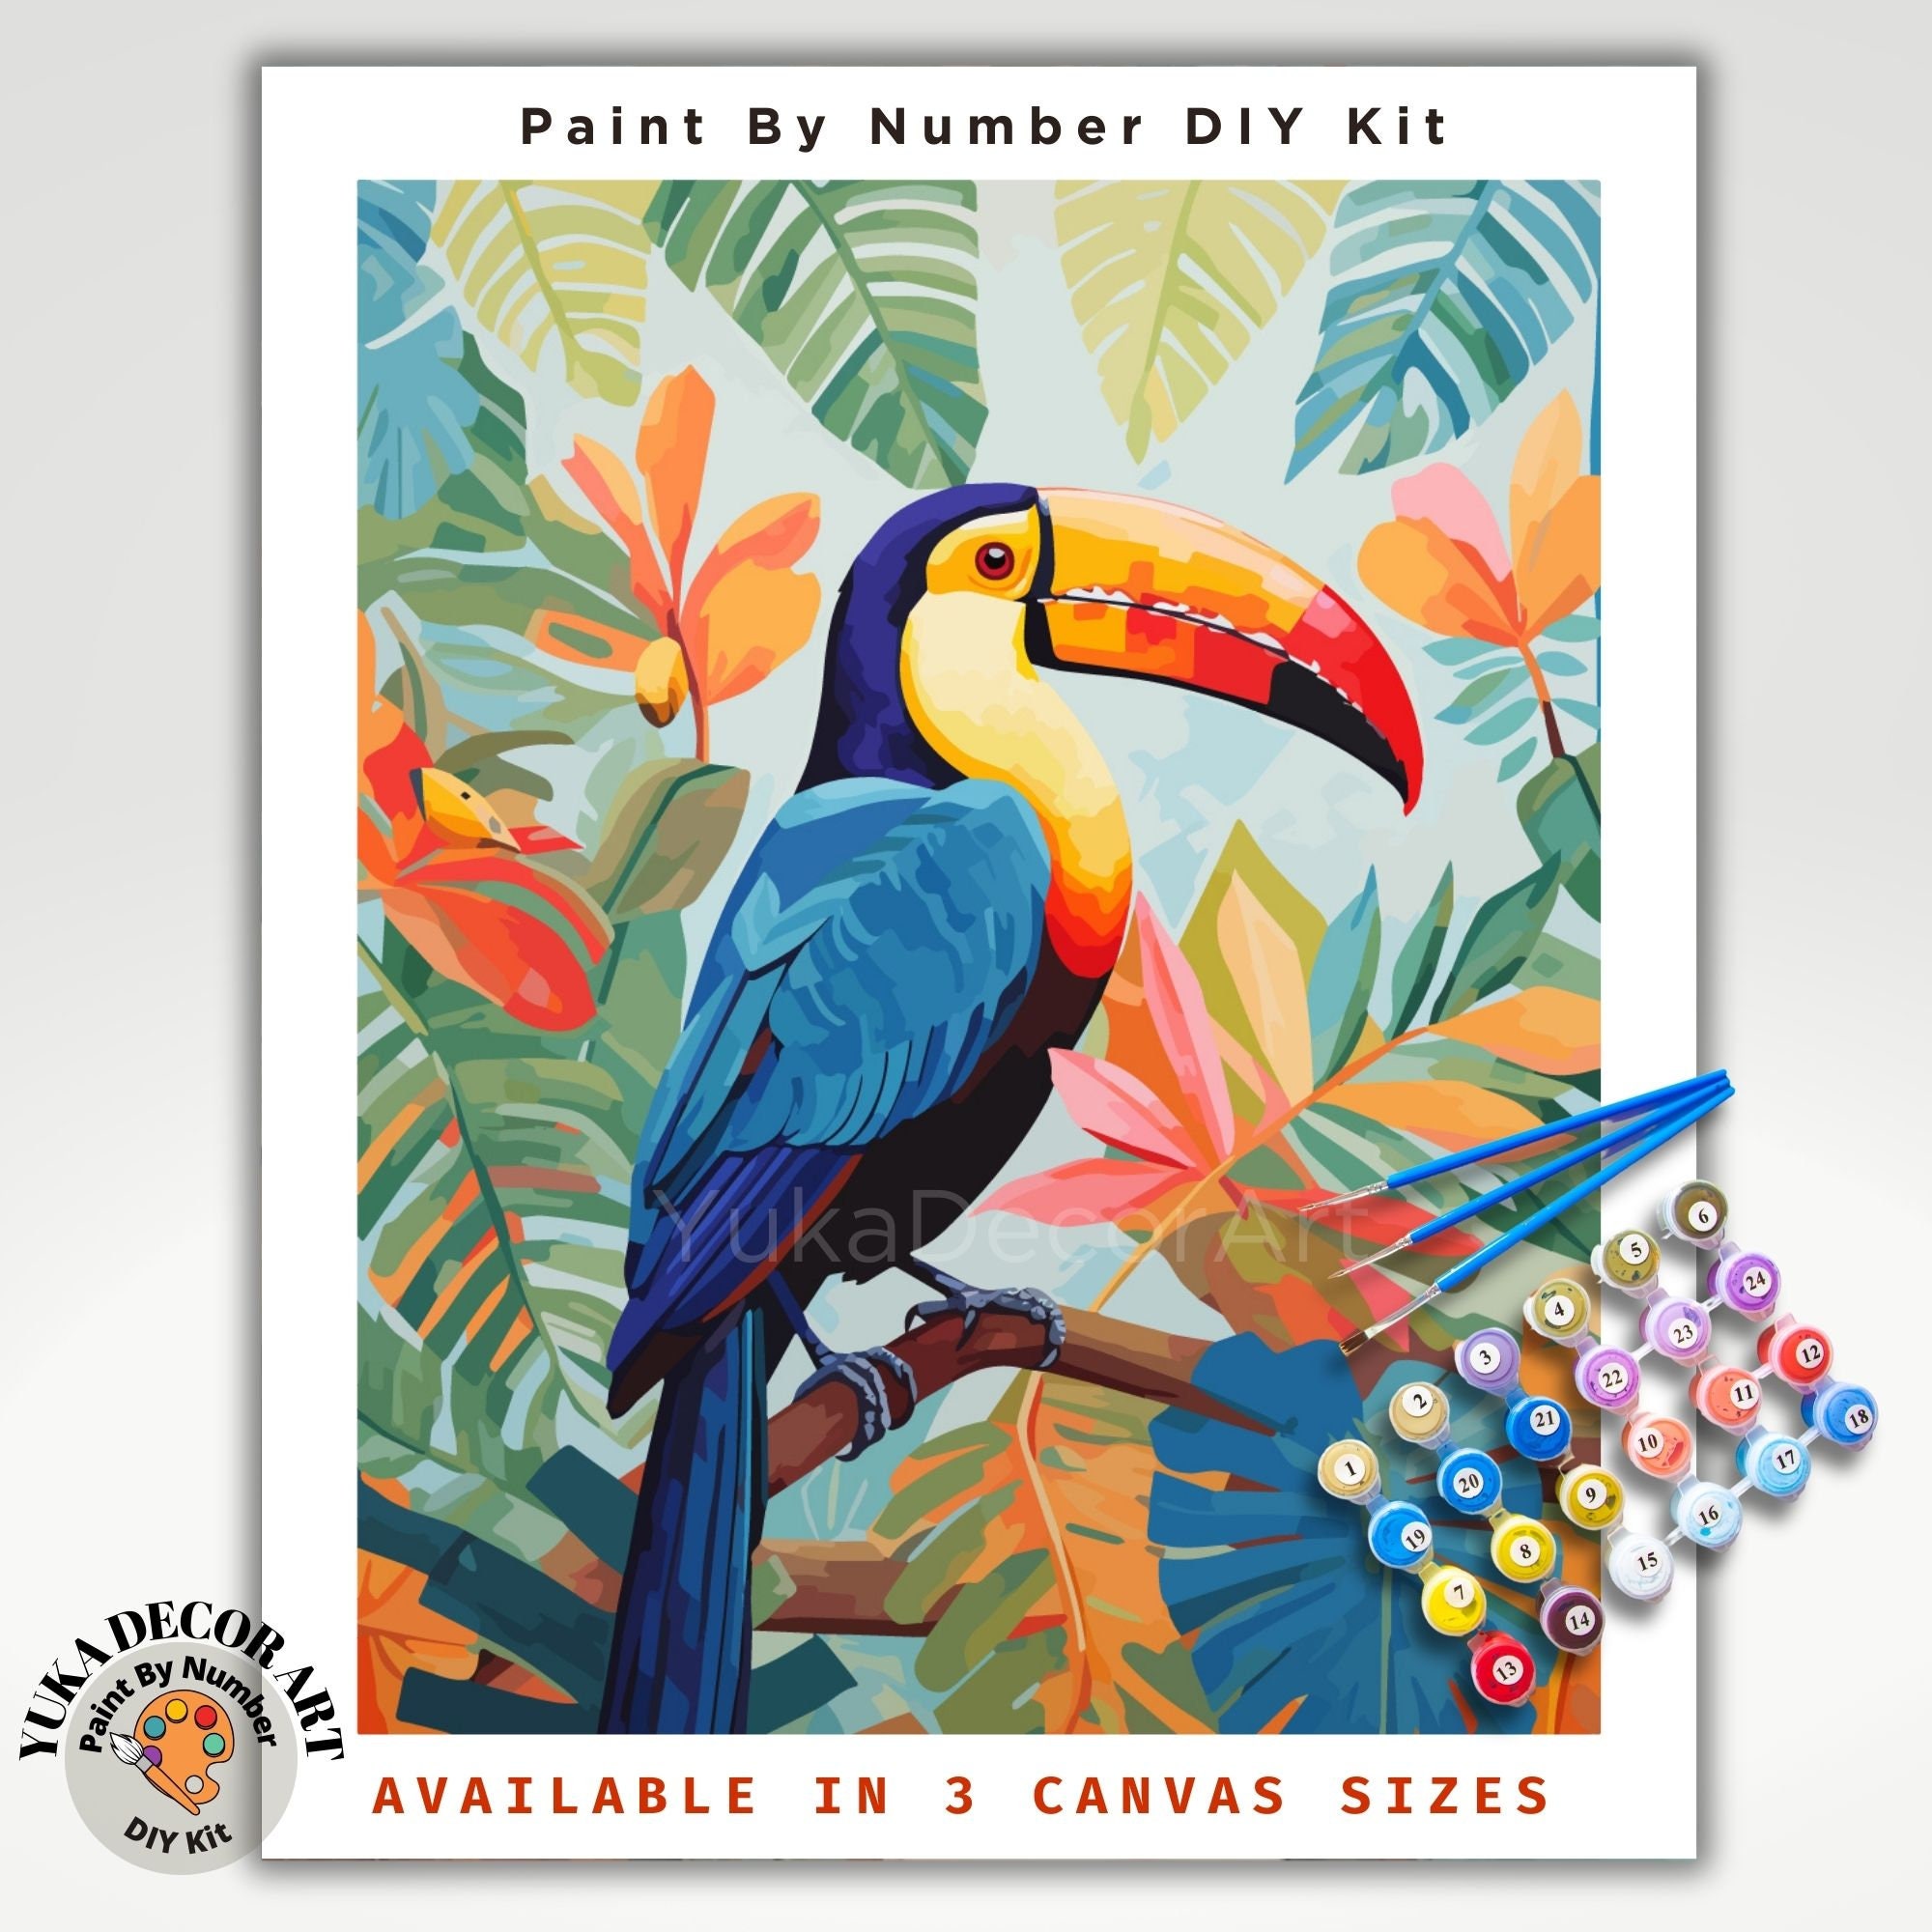 Paint by Numbers CAT 40x50 DIY Painting Kit Same Day AU -  Canada